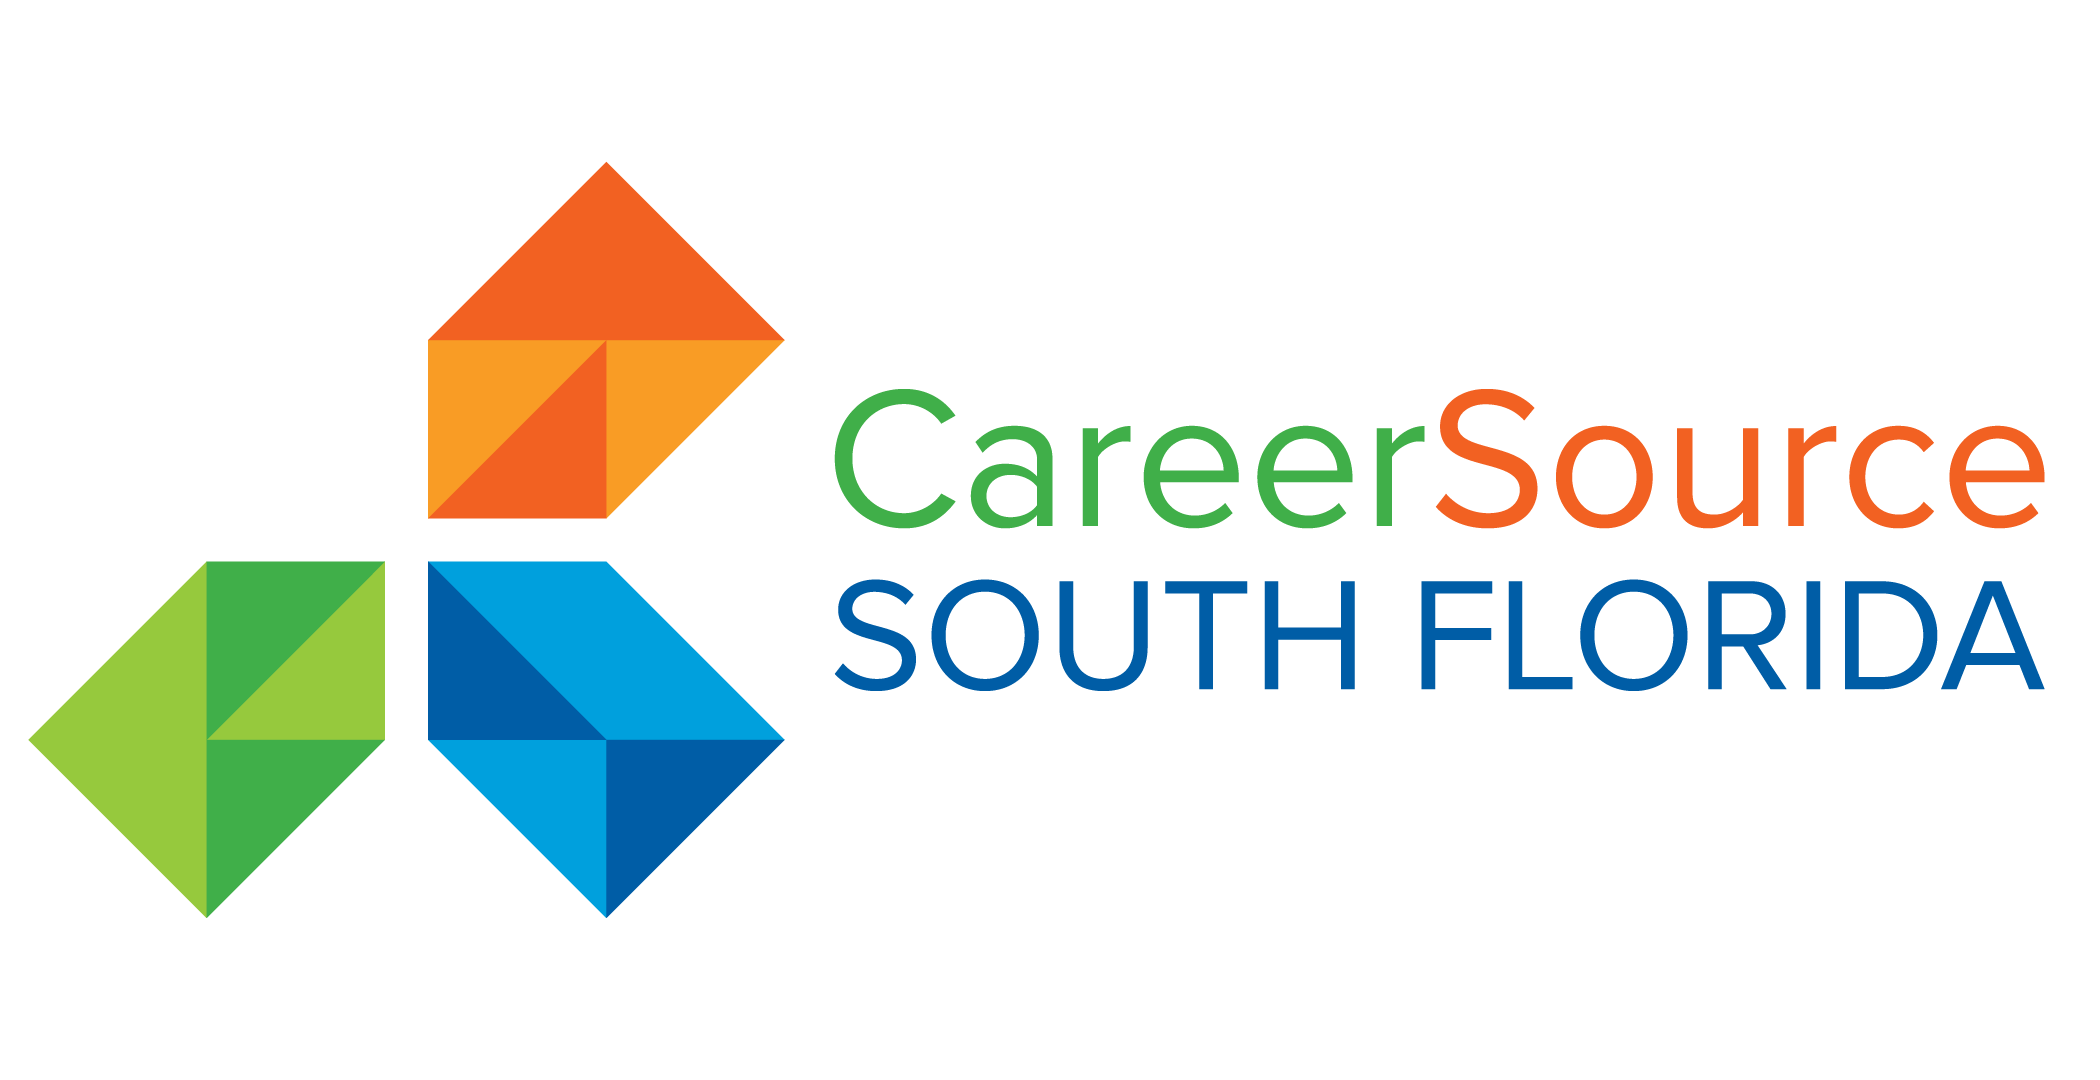 CareerSource South Florida